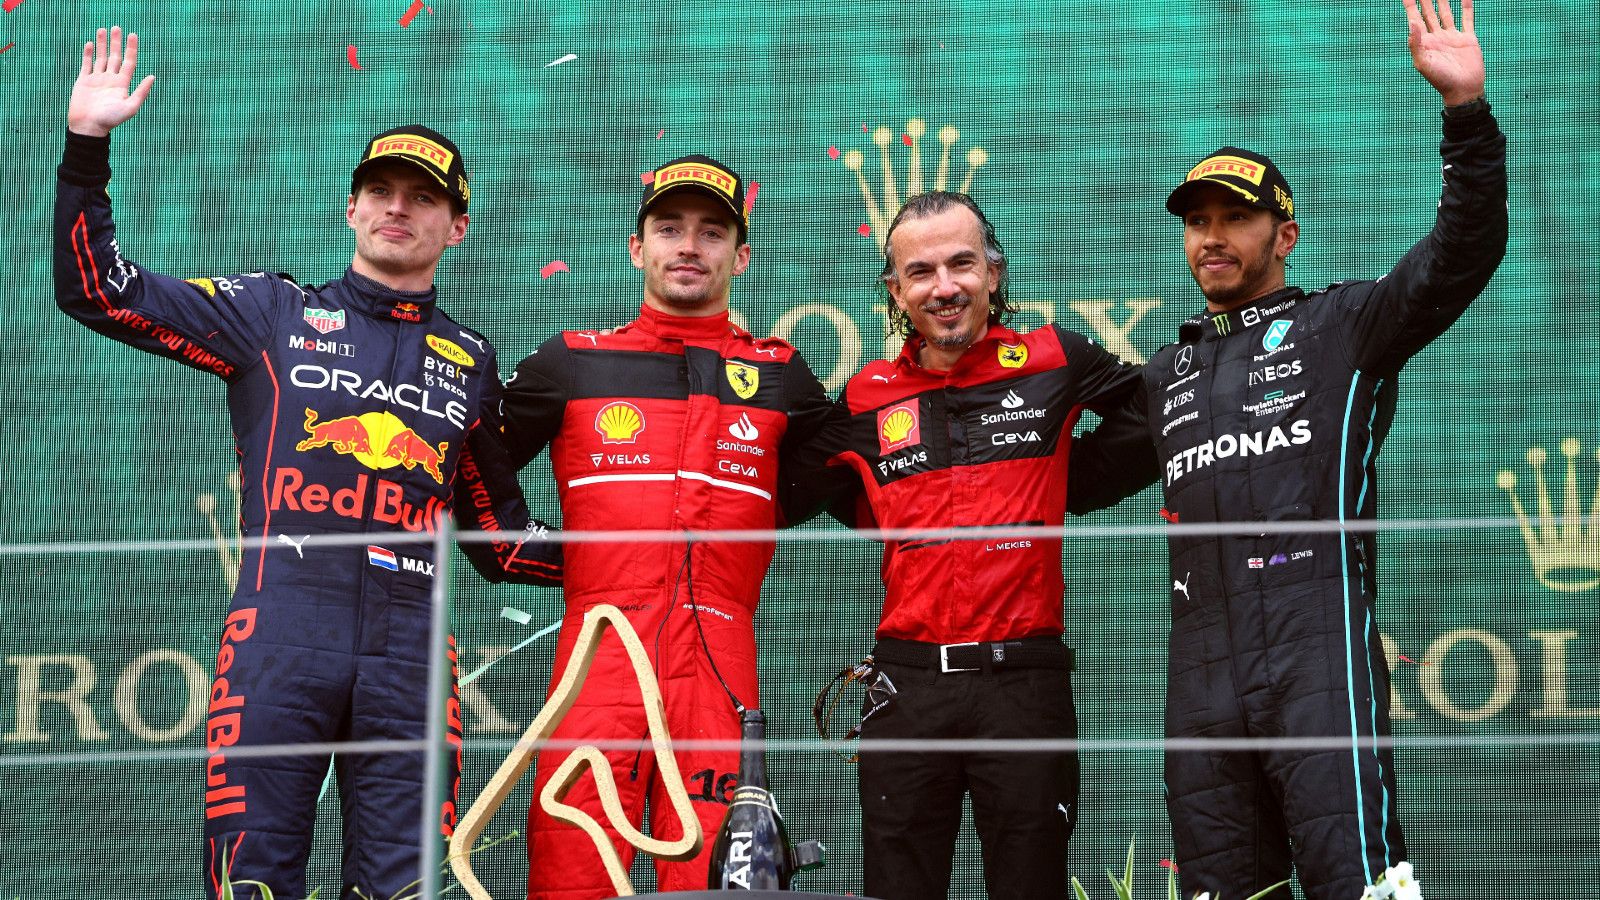 Ferrari's Charles Leclerc, Red Bull's Max Verstappen, and Mercedes' Lewis Hamilton on the podium at the Austrian Grand Prix. Spielberg, July 2022.